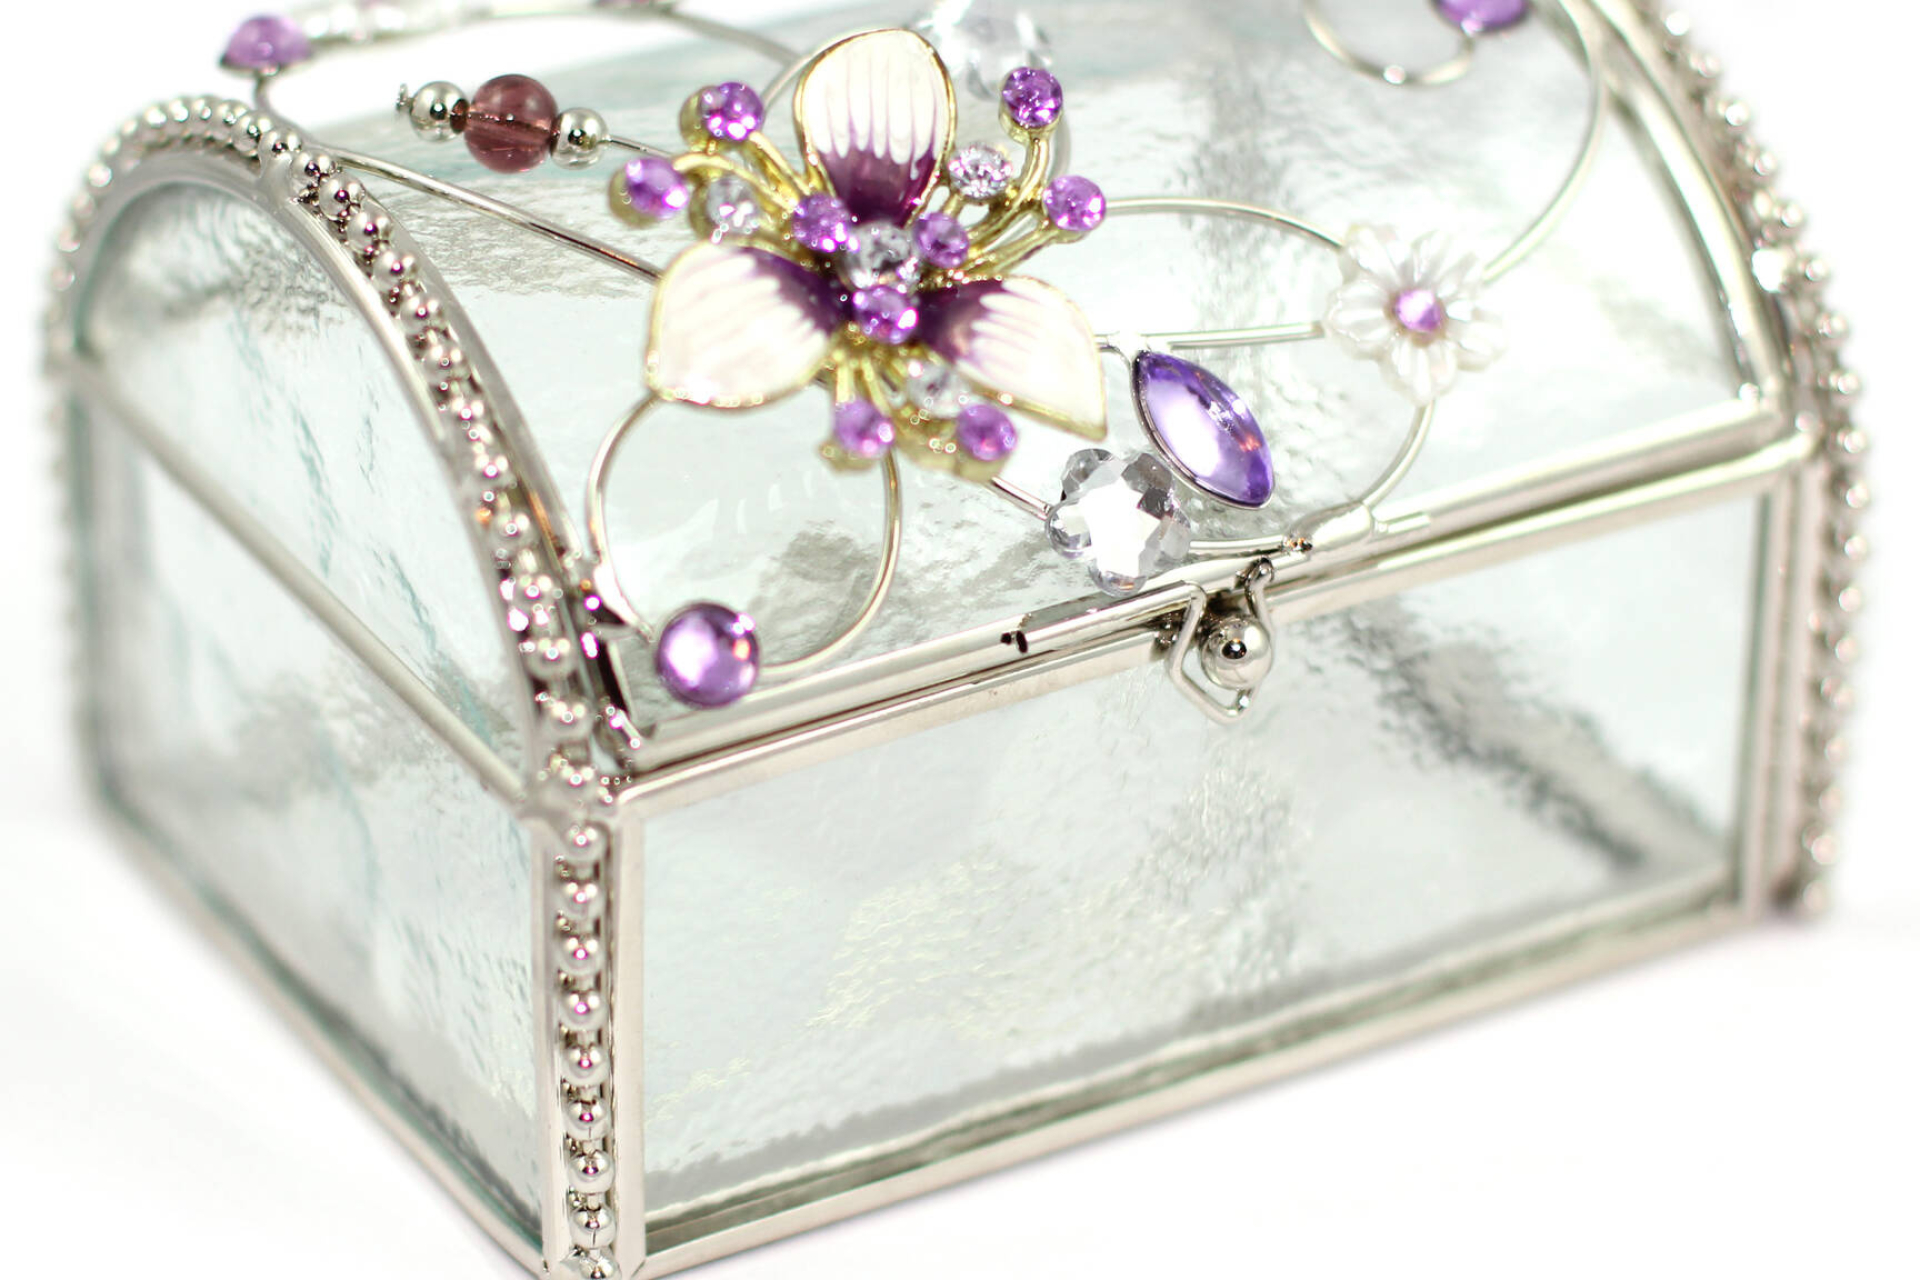 Jewelry box image crystal jewelry box images glass 18077 | ~ free pics on cc-by license 1920x1280